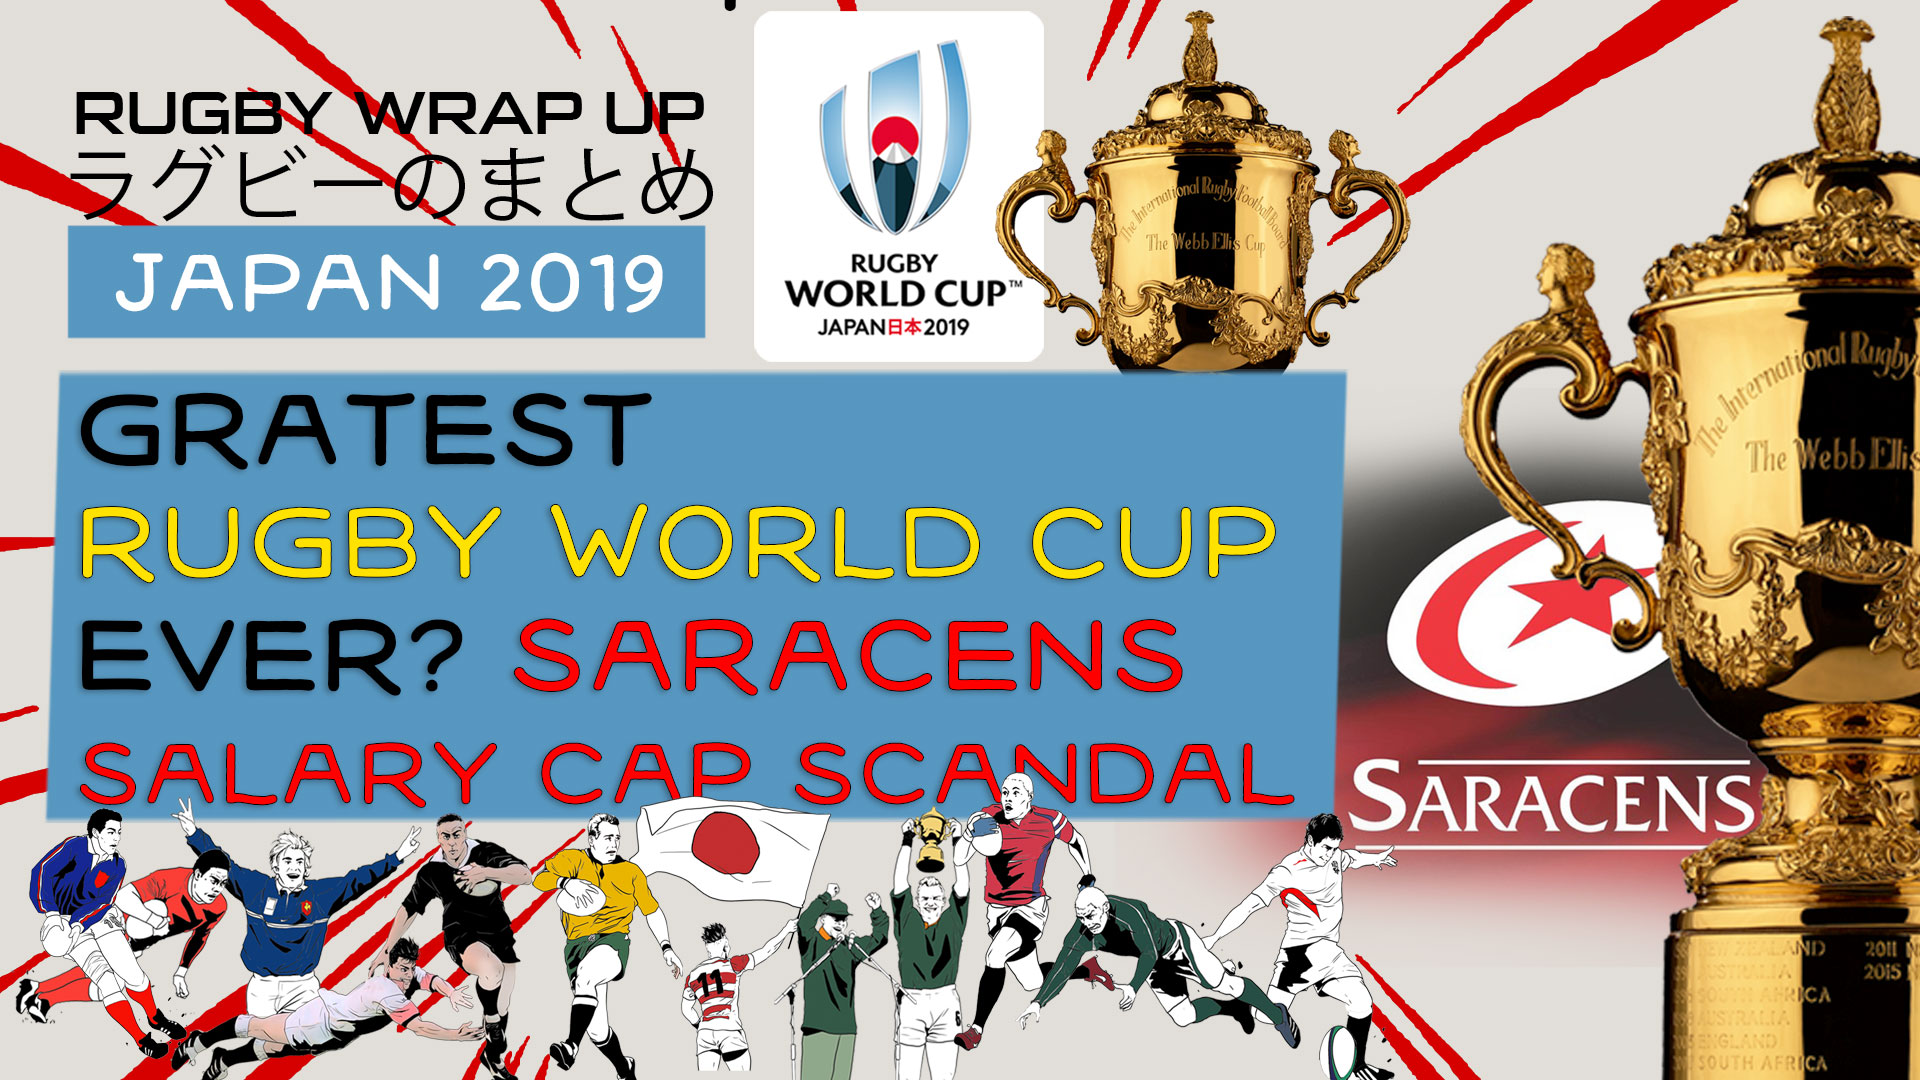 Rugby TV and Podcast: Best Rugby World Cup Ever? Saracens Salary Cap Scandal